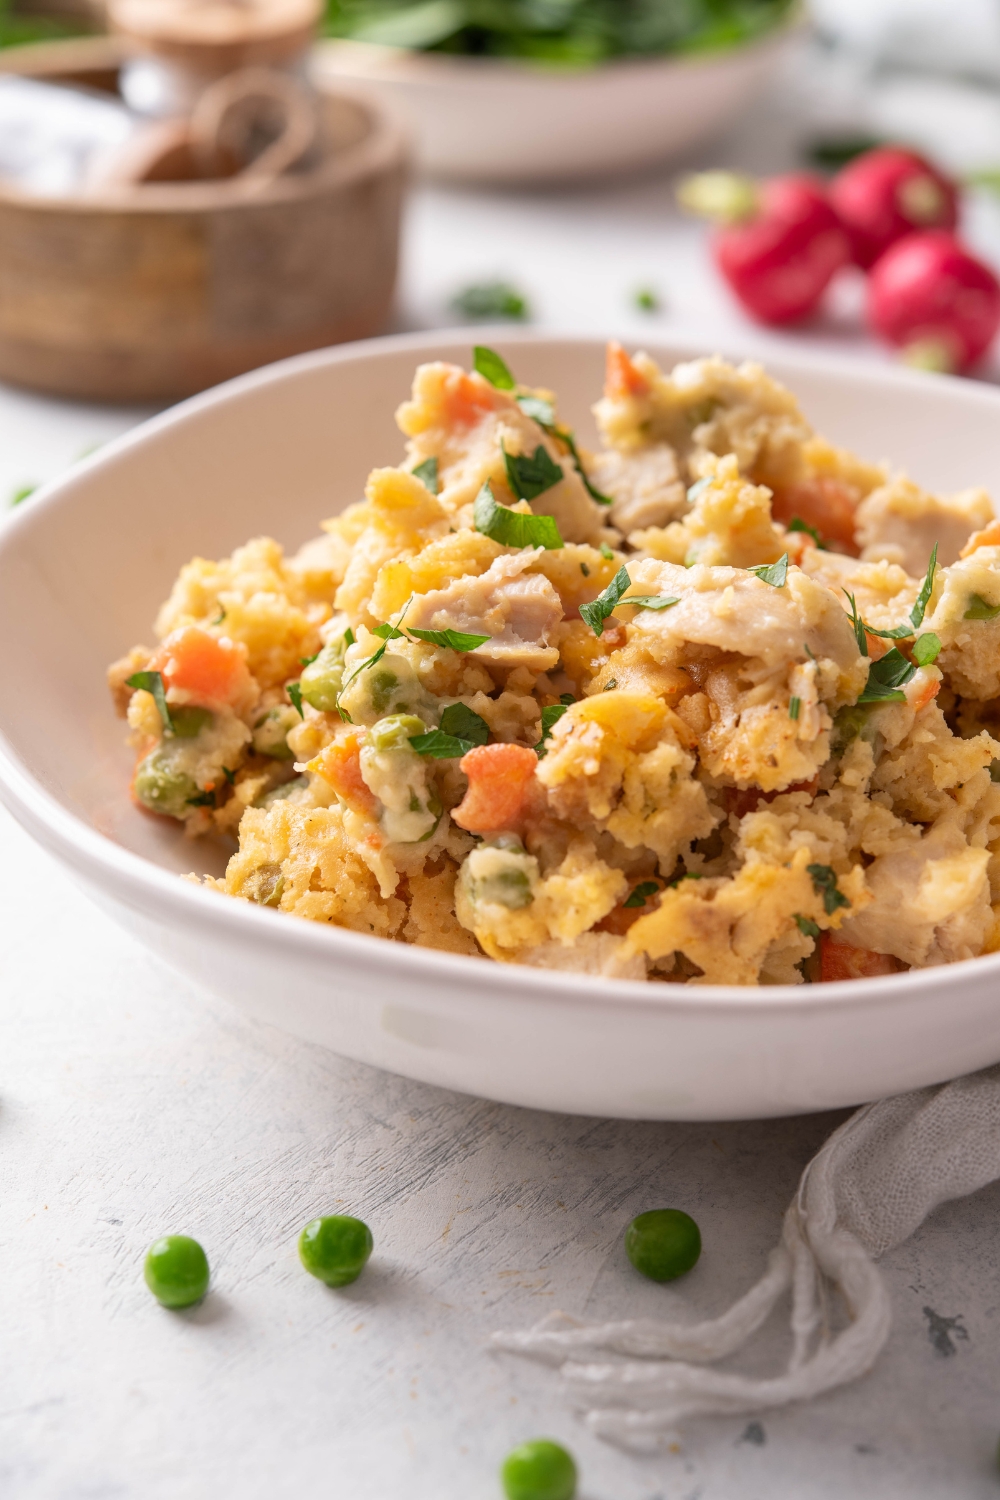 A bowl of chicken casserole with cooked chicken in a creamy sauce mixed with carrots, peas, and a crumbly biscuit topping and garnished with fresh herbs.